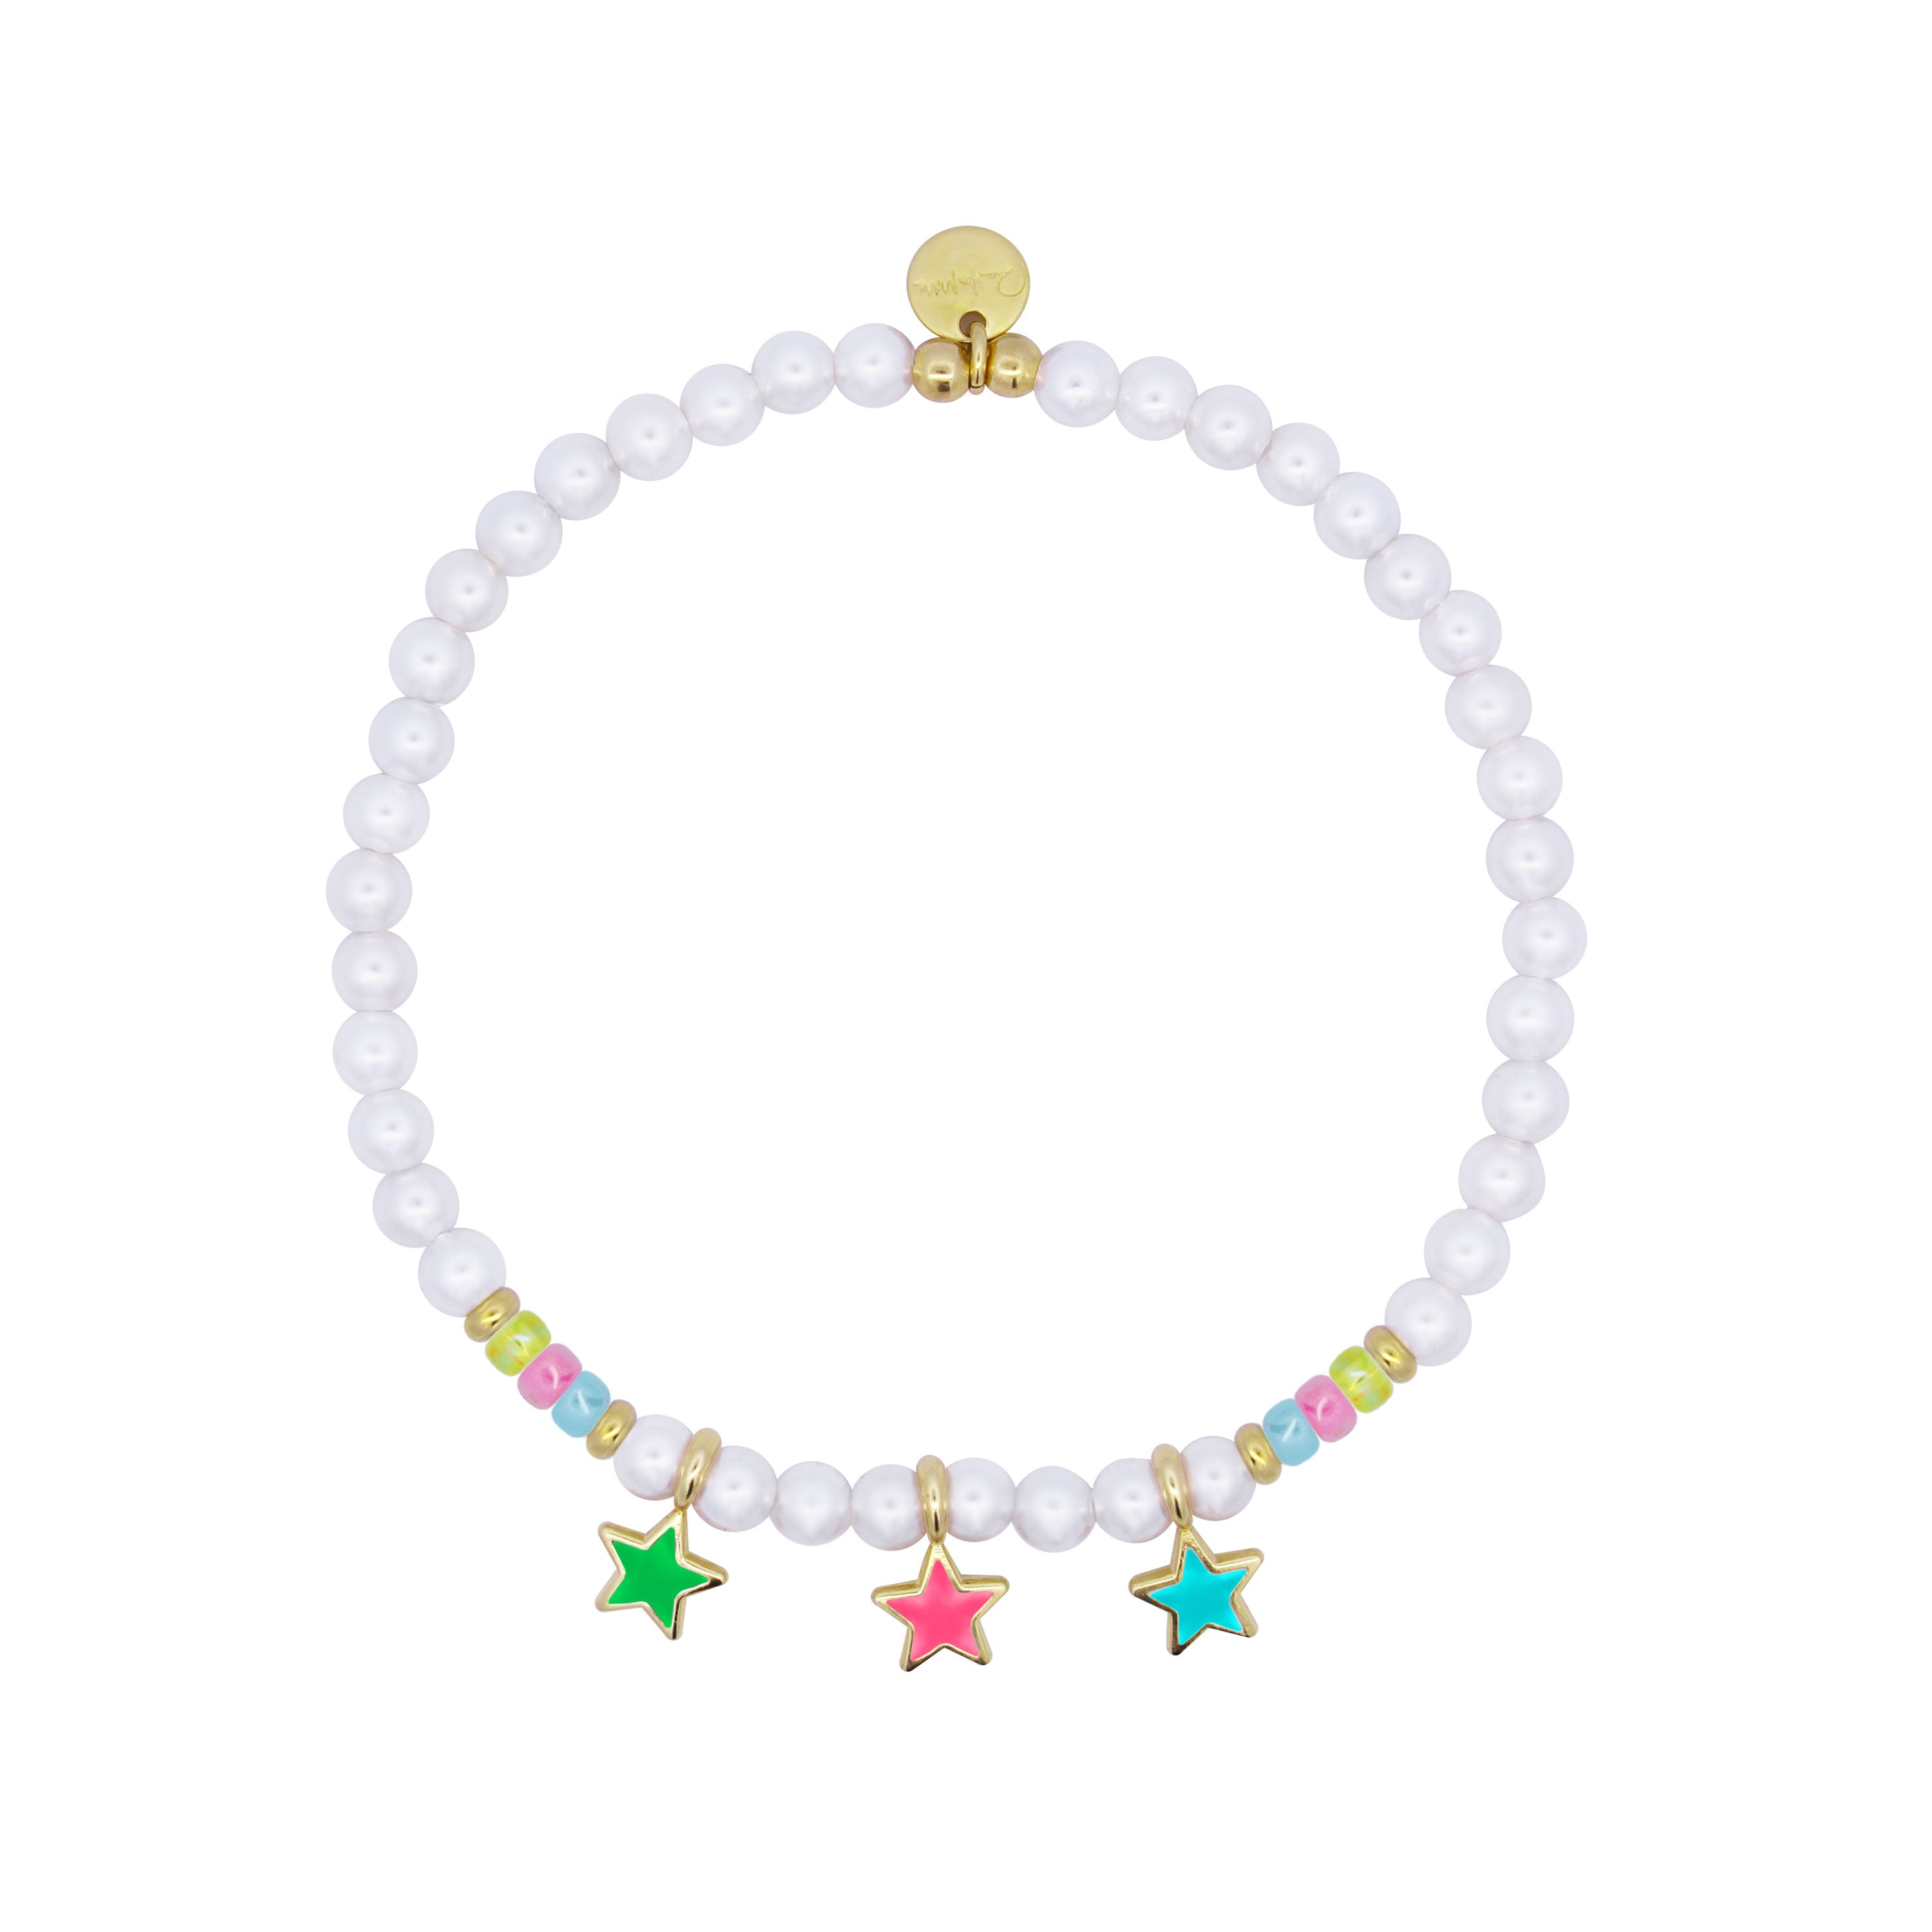 Elastic bracelet with pearls, beads and three stars - ColorFUN